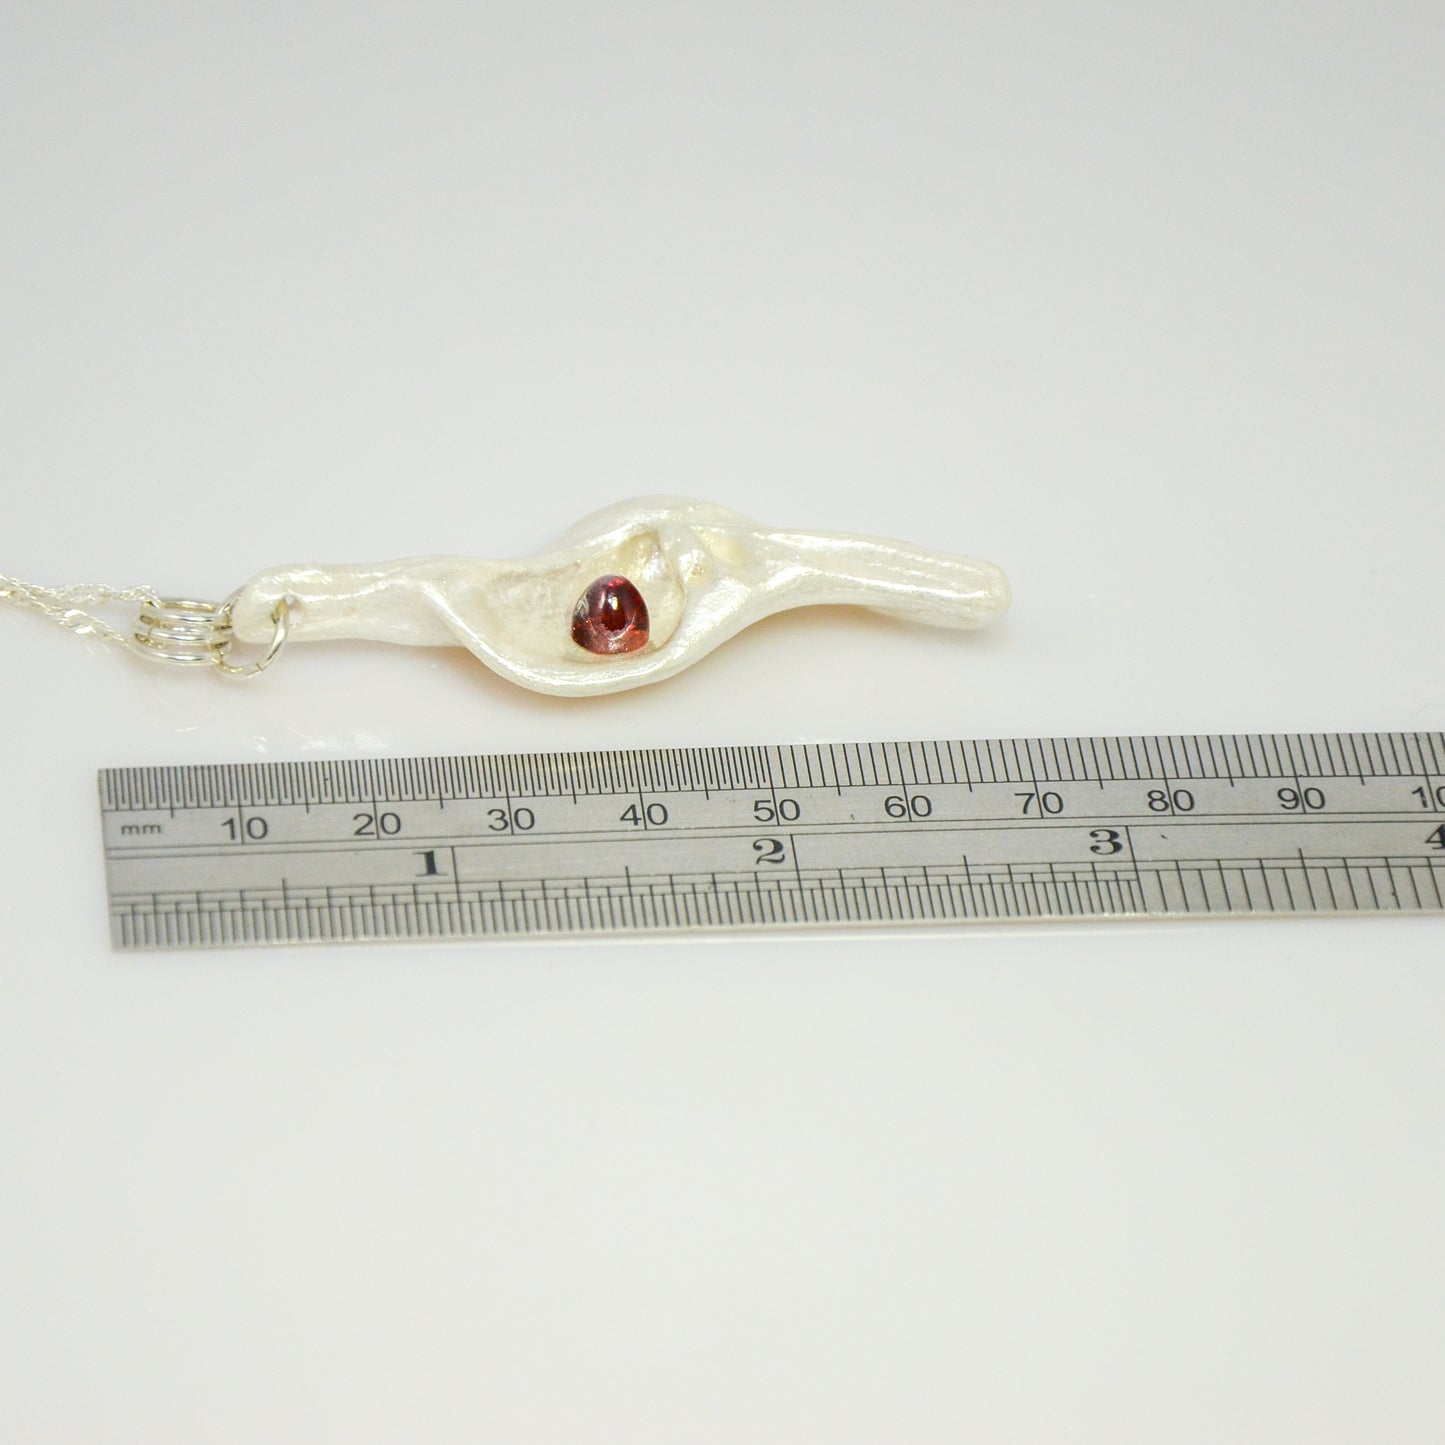 Pomegranate natural seashell pendant is adorned with a stunning Garnet gemstone. The pendant lays along side of a ruler to show the viewer the length of the pendant.